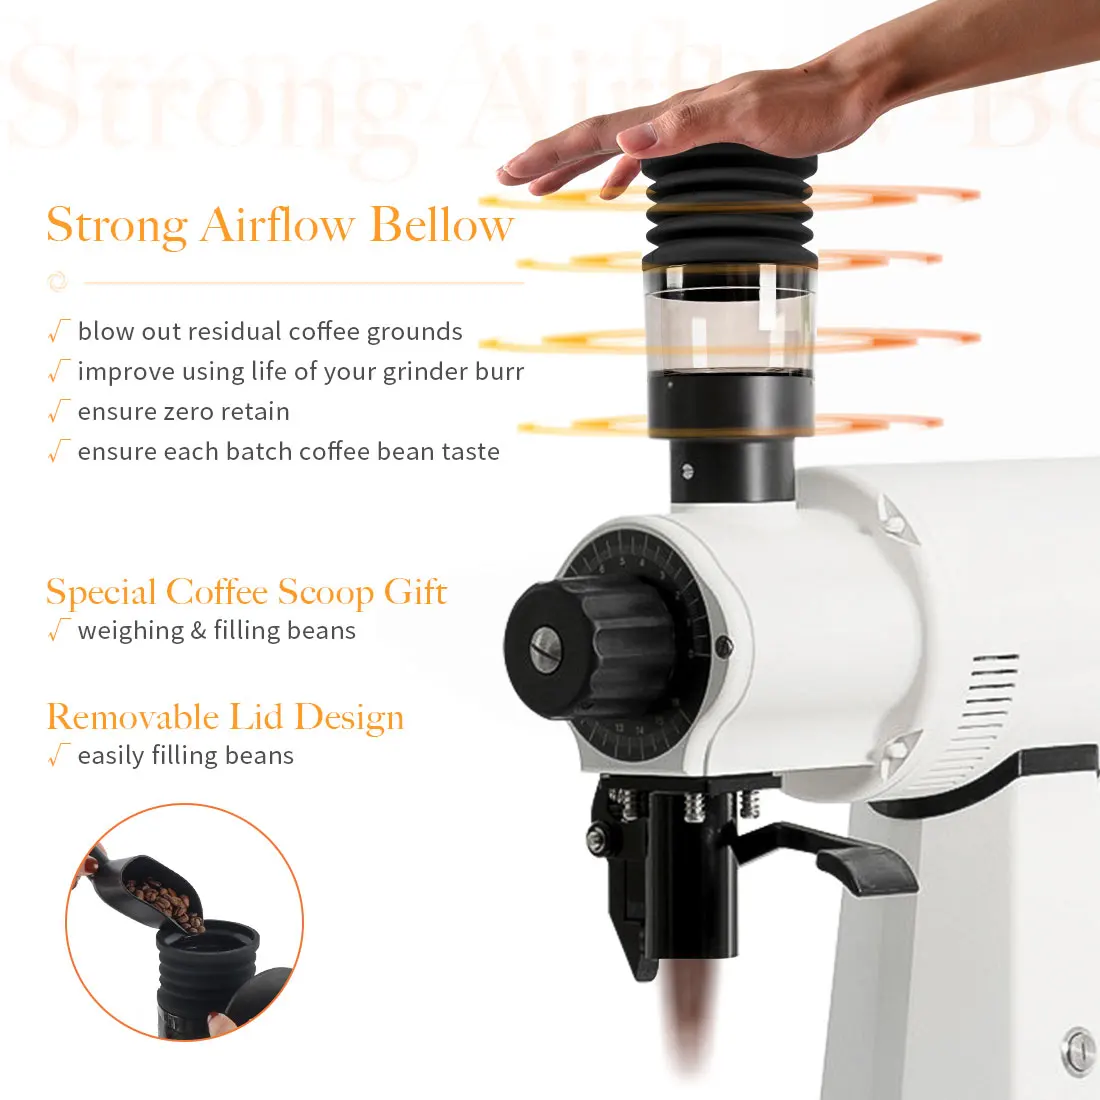 https://ae01.alicdn.com/kf/S4ee99bea36f349e5baeb3aa1b8932438U/CAFEMASY-Coffee-Beans-Grinder-Single-Dose-Hopper-Coffee-Grinder-Cleaning-Tool-Silicone-Bellows-For-Mahlkonig-EK43.jpg